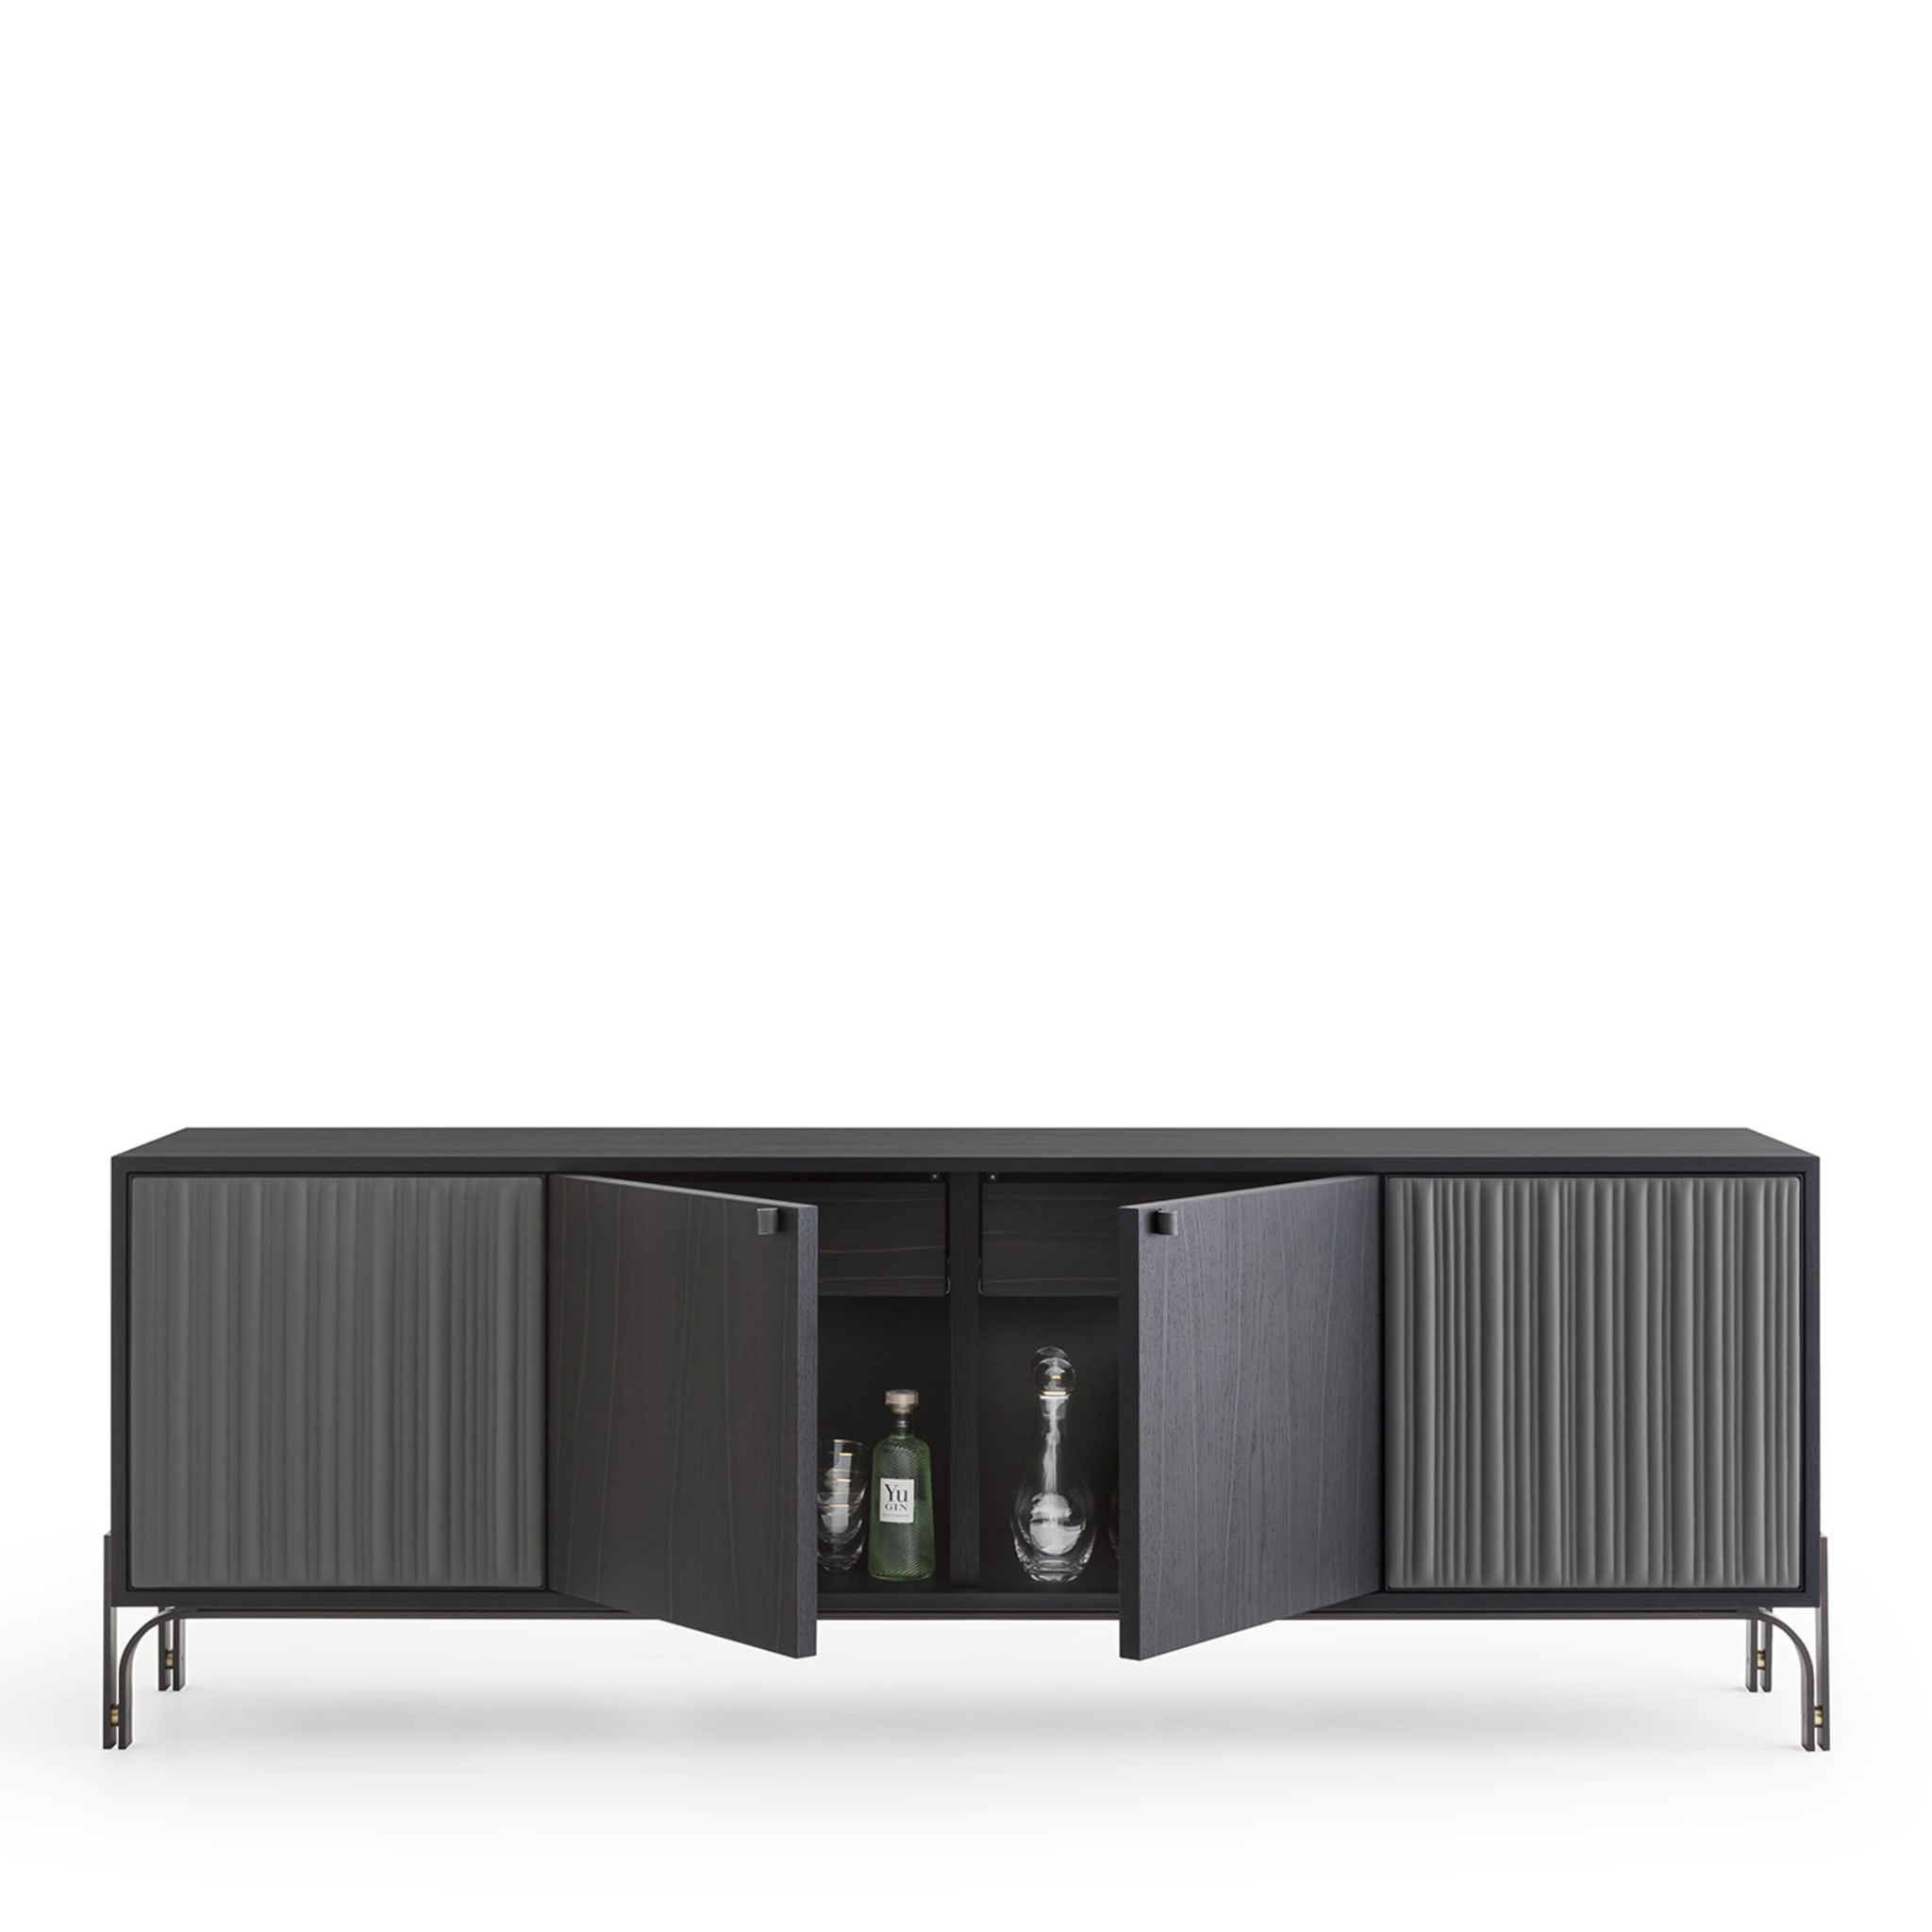 Canette 2-Door Anthracite-Gray Nubuck Leather & Oak Sideboard - Alternative view 3